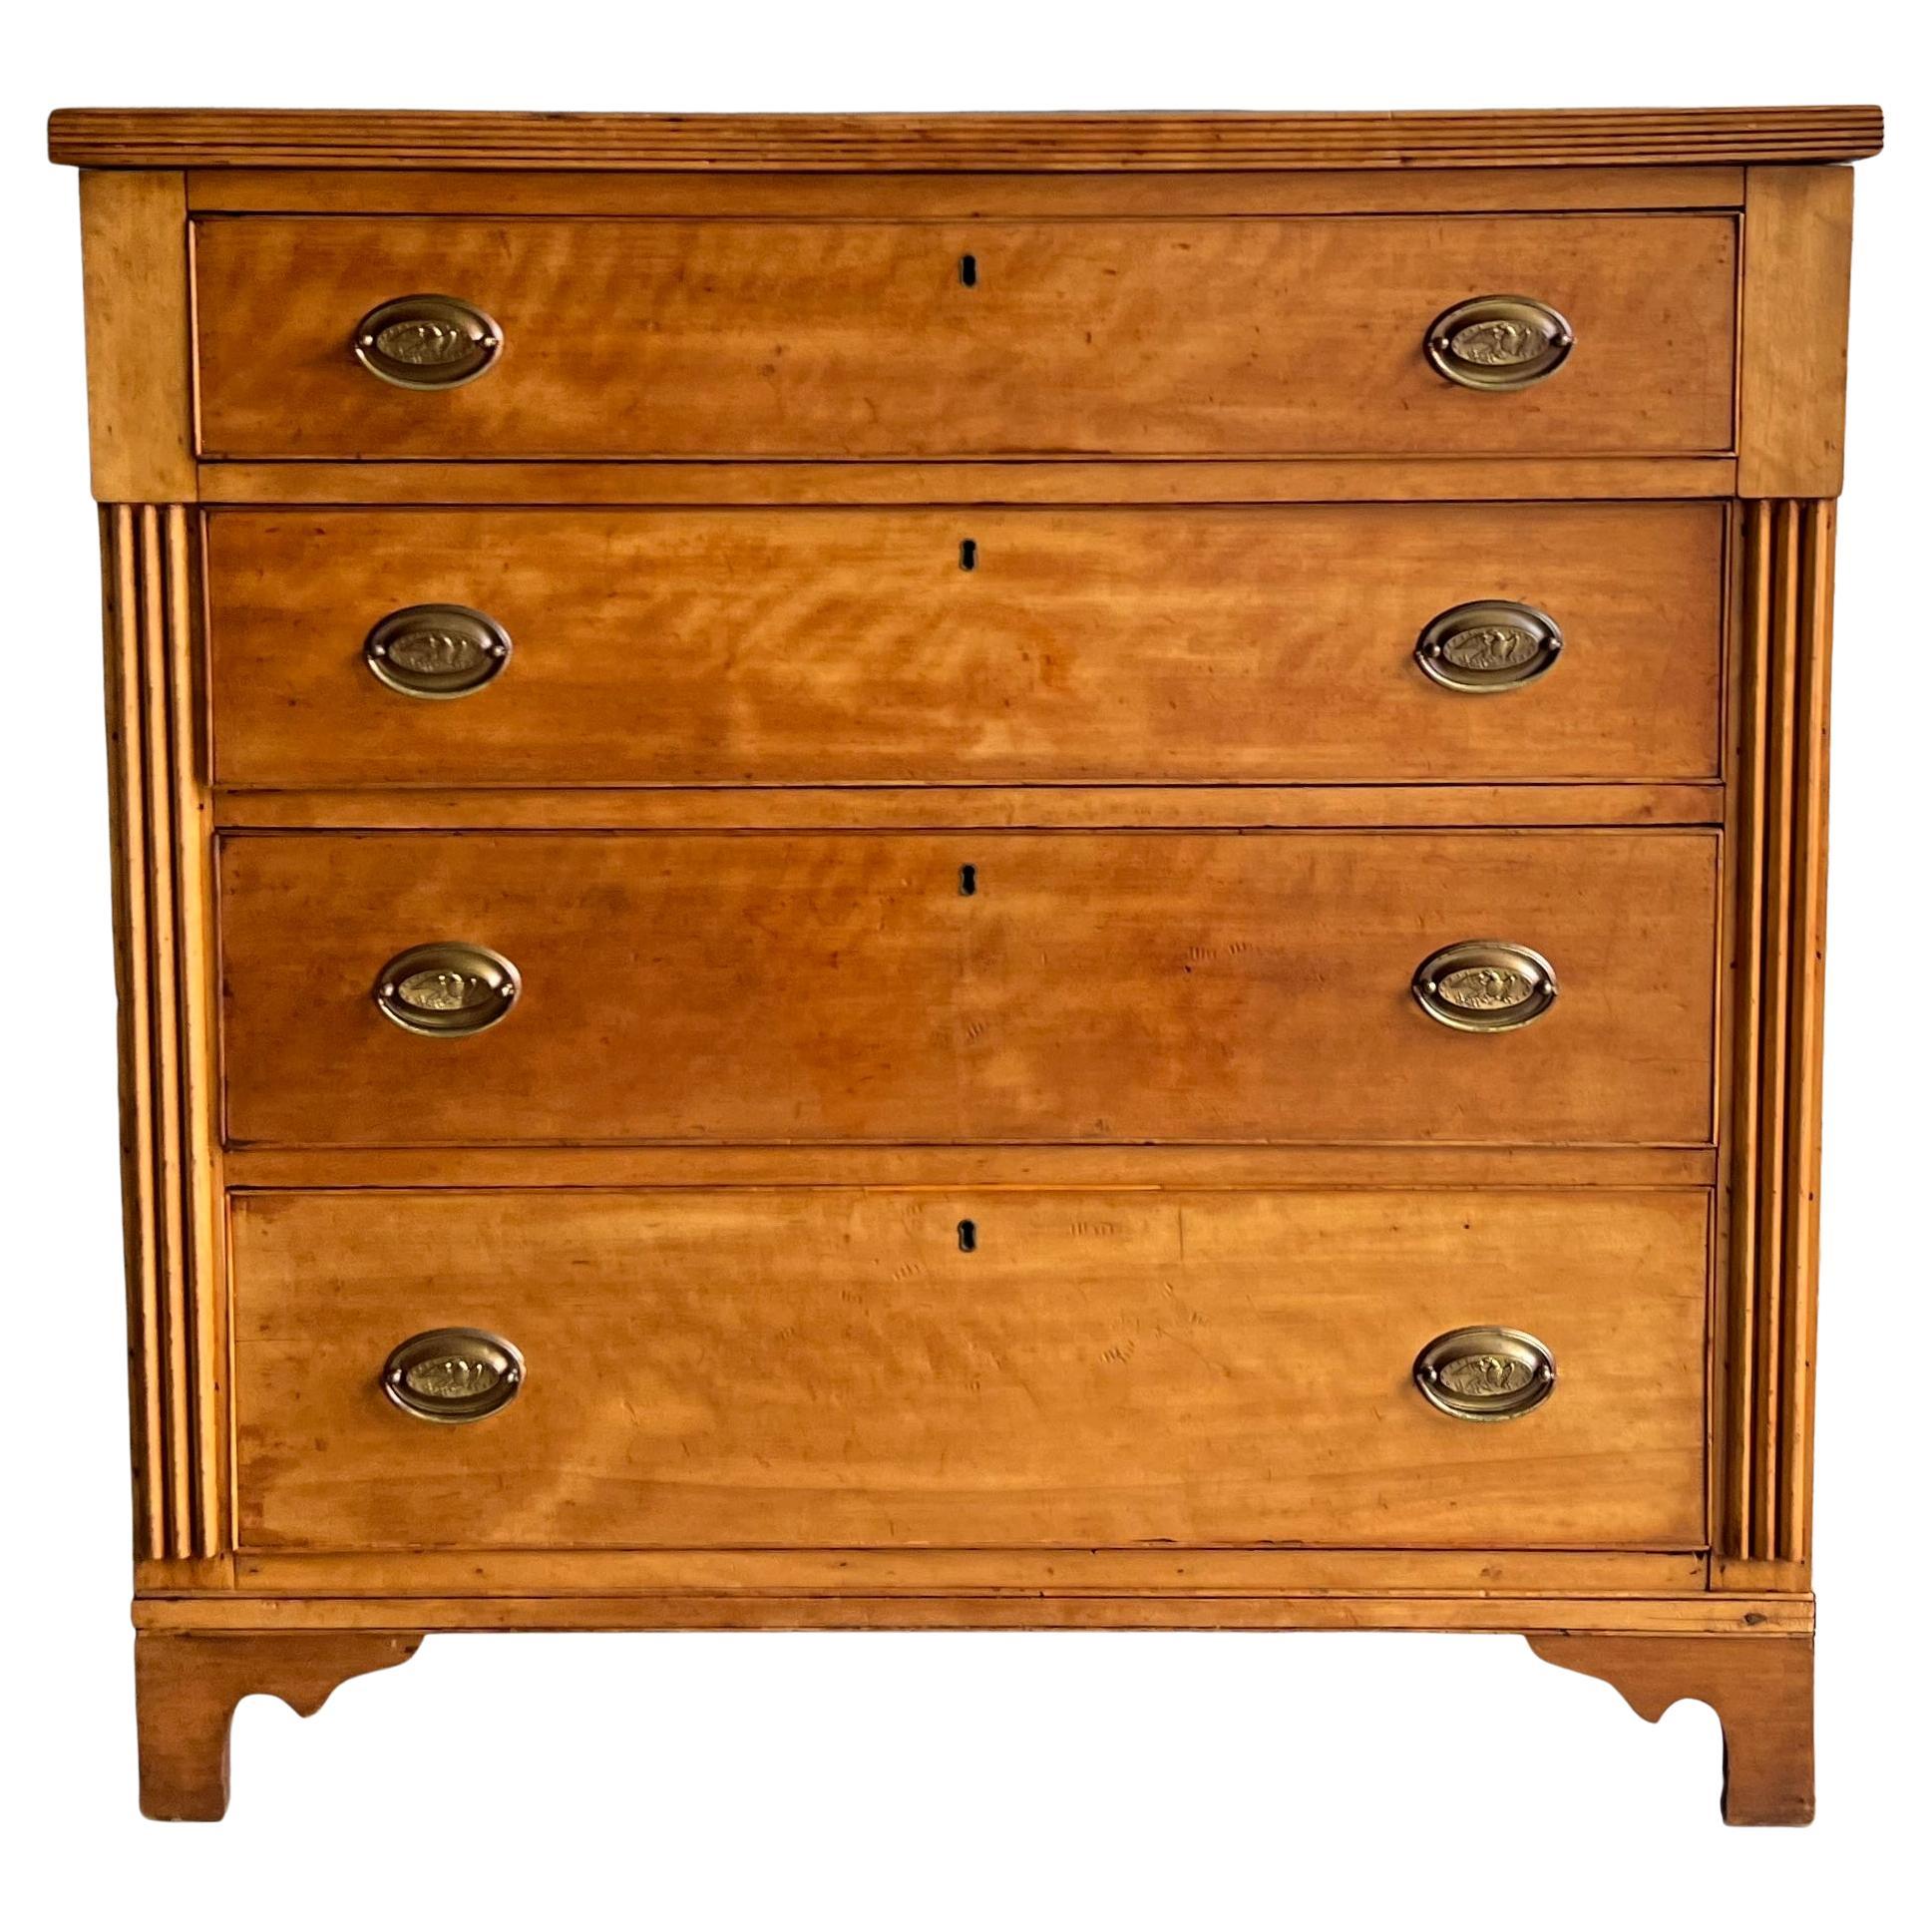 19th-C. American Federal Style Tiger Maple Chest or Commode For Sale